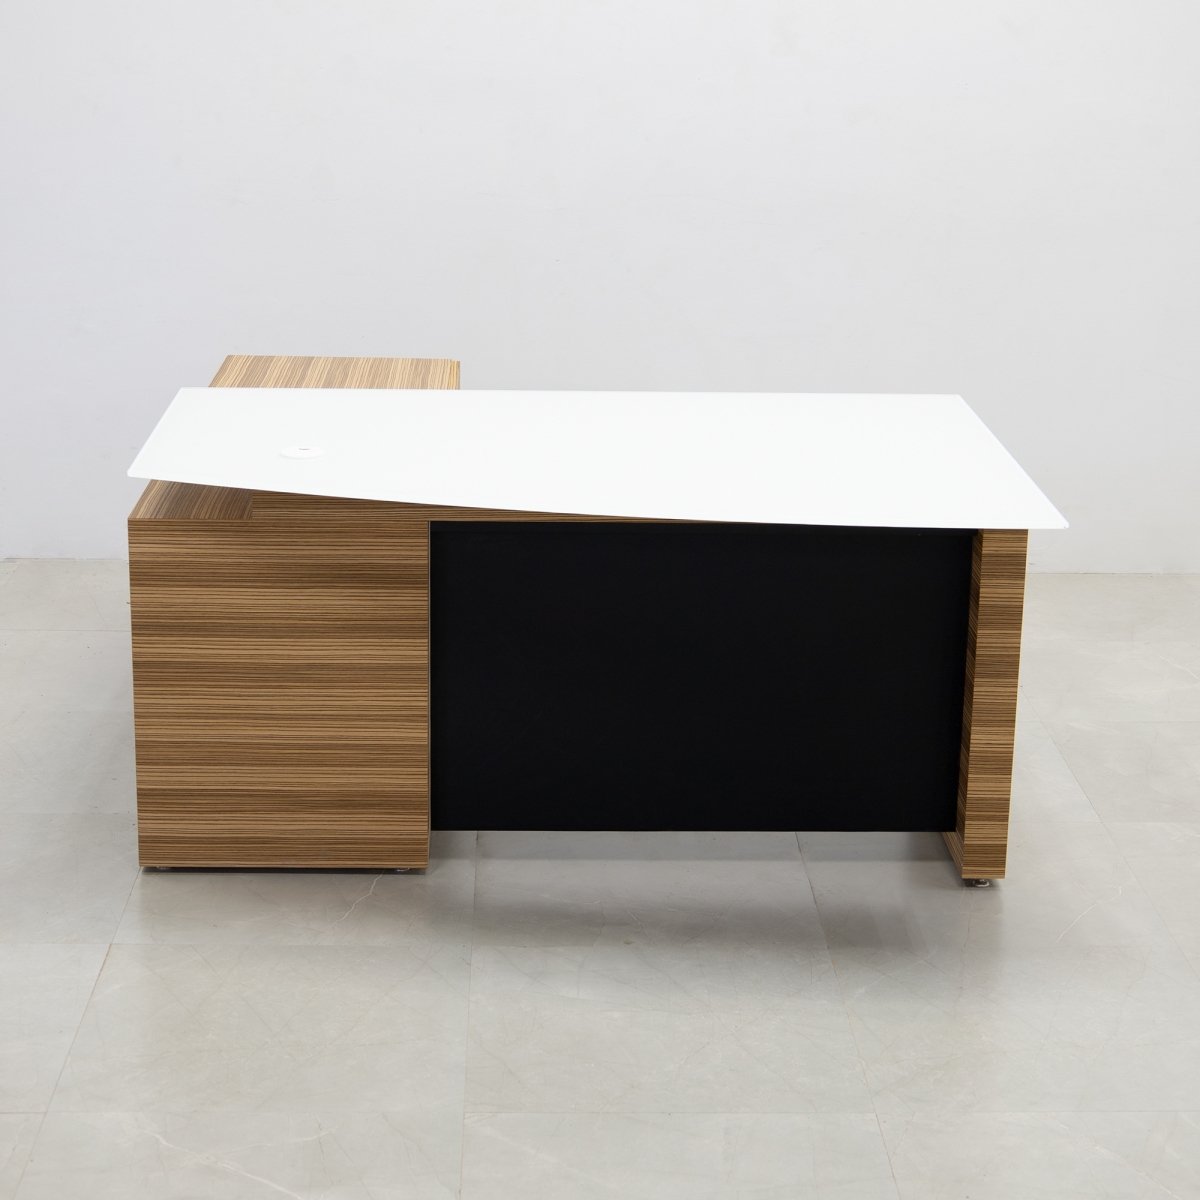 Avenue Curved Office Desk With Credenza and Glass Top